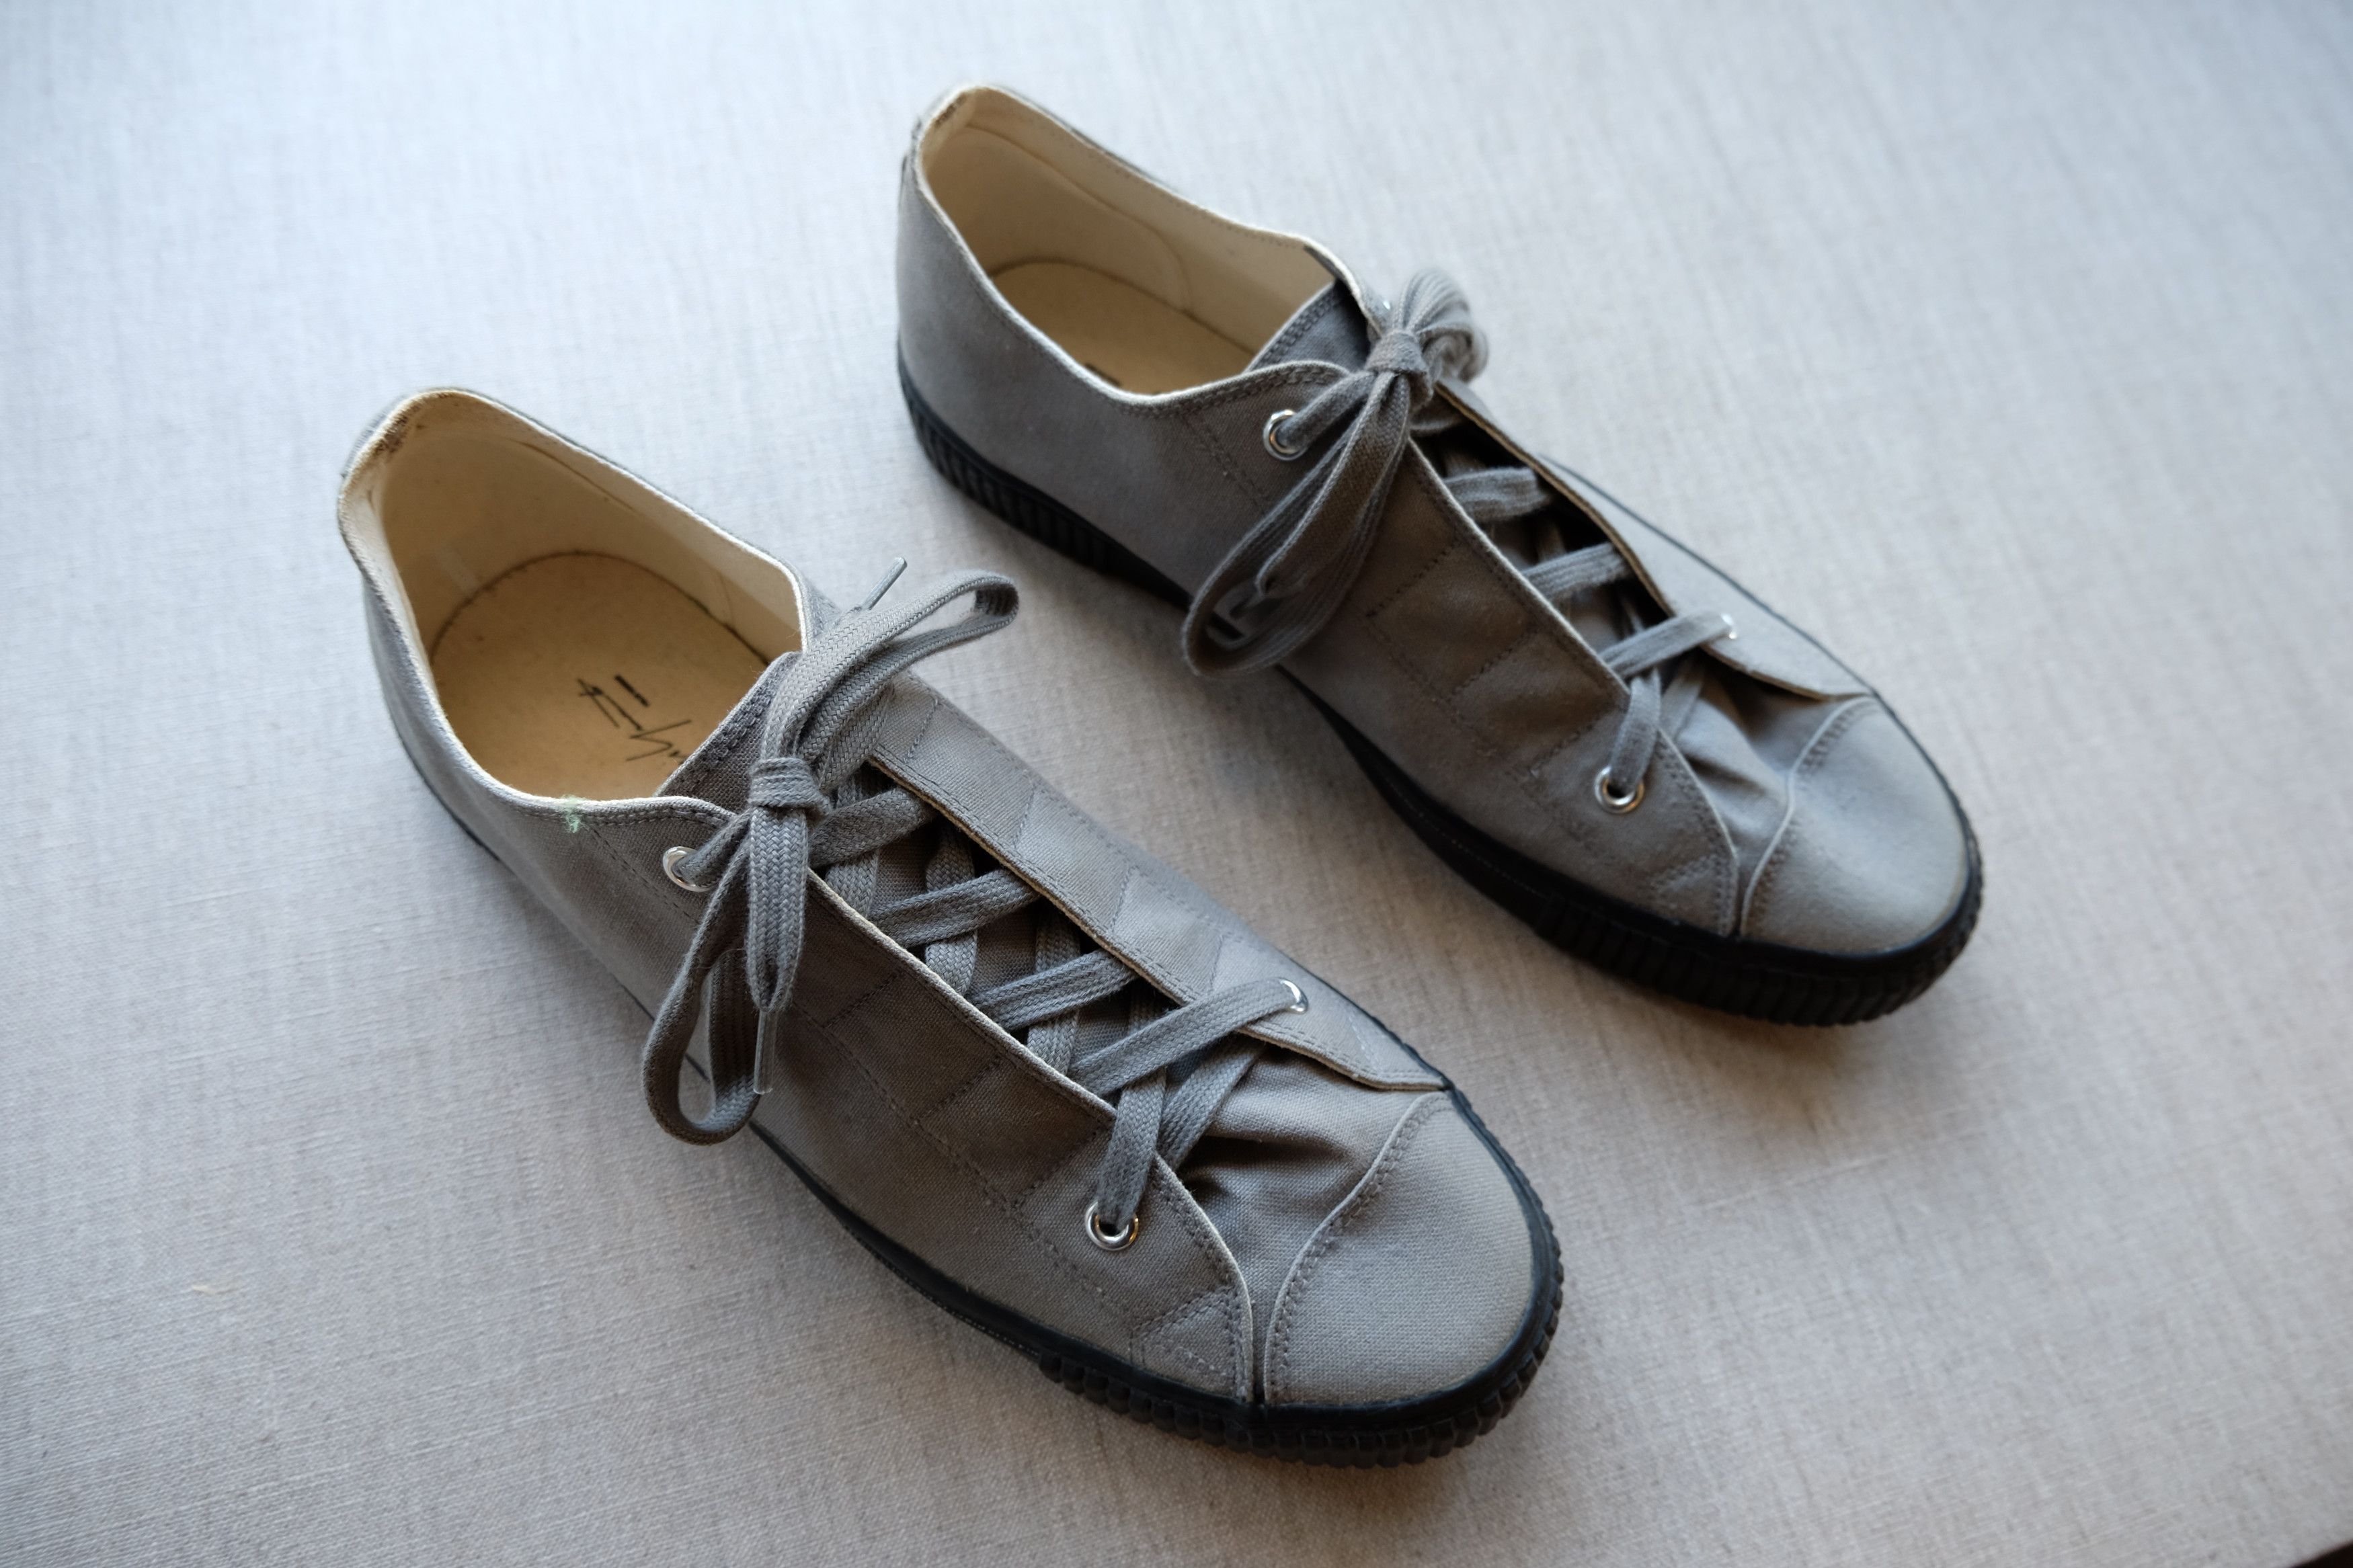 SS16-Runway Canvas Shoes with Hidden Eyelets - 7